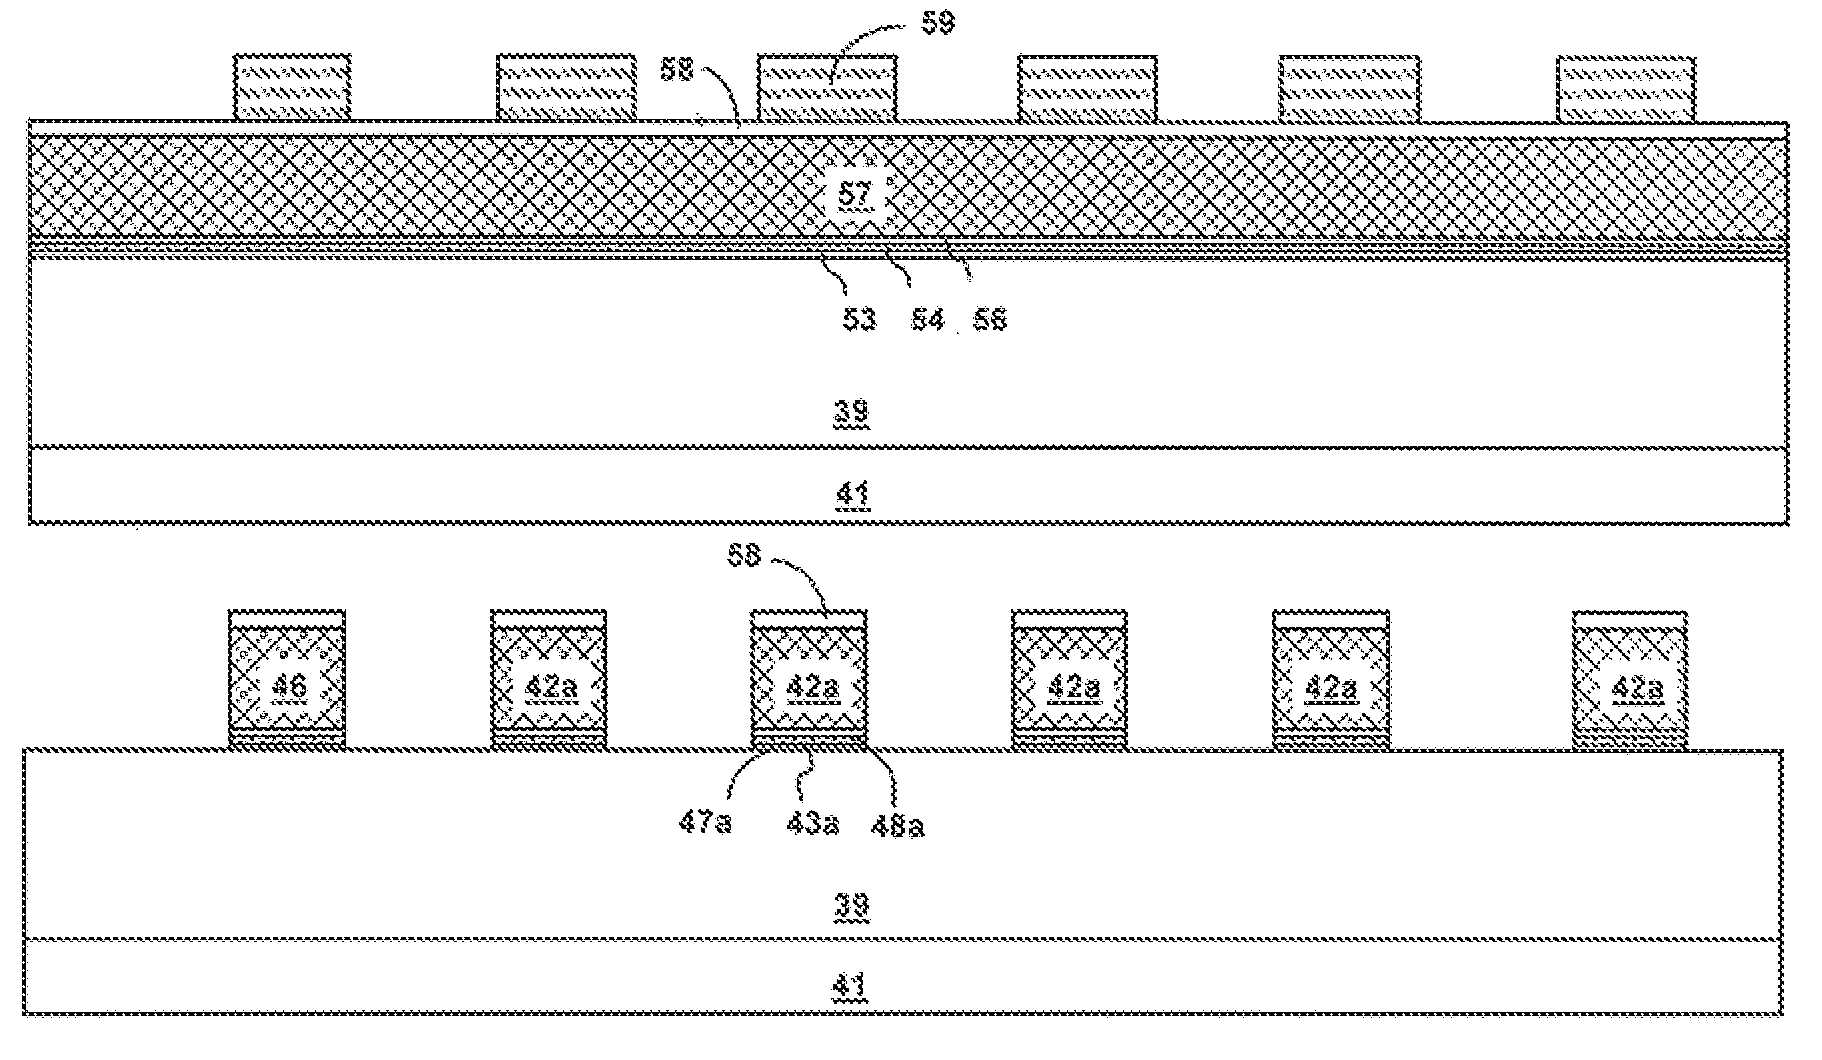 NAND Flash Memory with Densely Packed Memory Gates and Fabrication Process